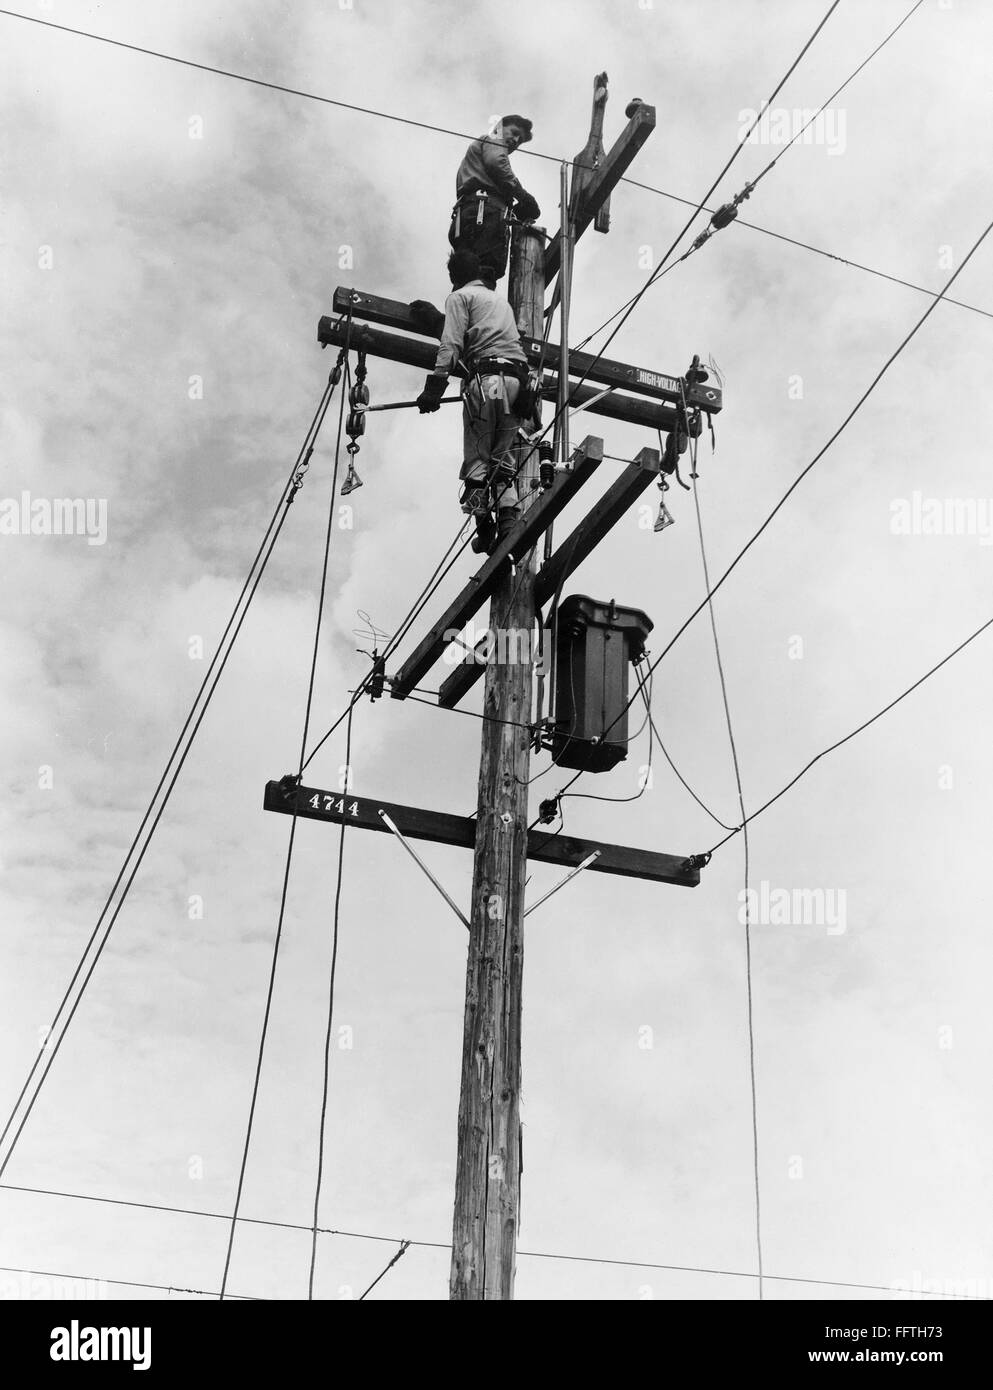 ELECTRIFICATION, 1938. /nWorkmen installing electricity on the top of utility poles in the San Joaquin Valley, California. Photograph by Dorothea Lange, November 1938. Stock Photo